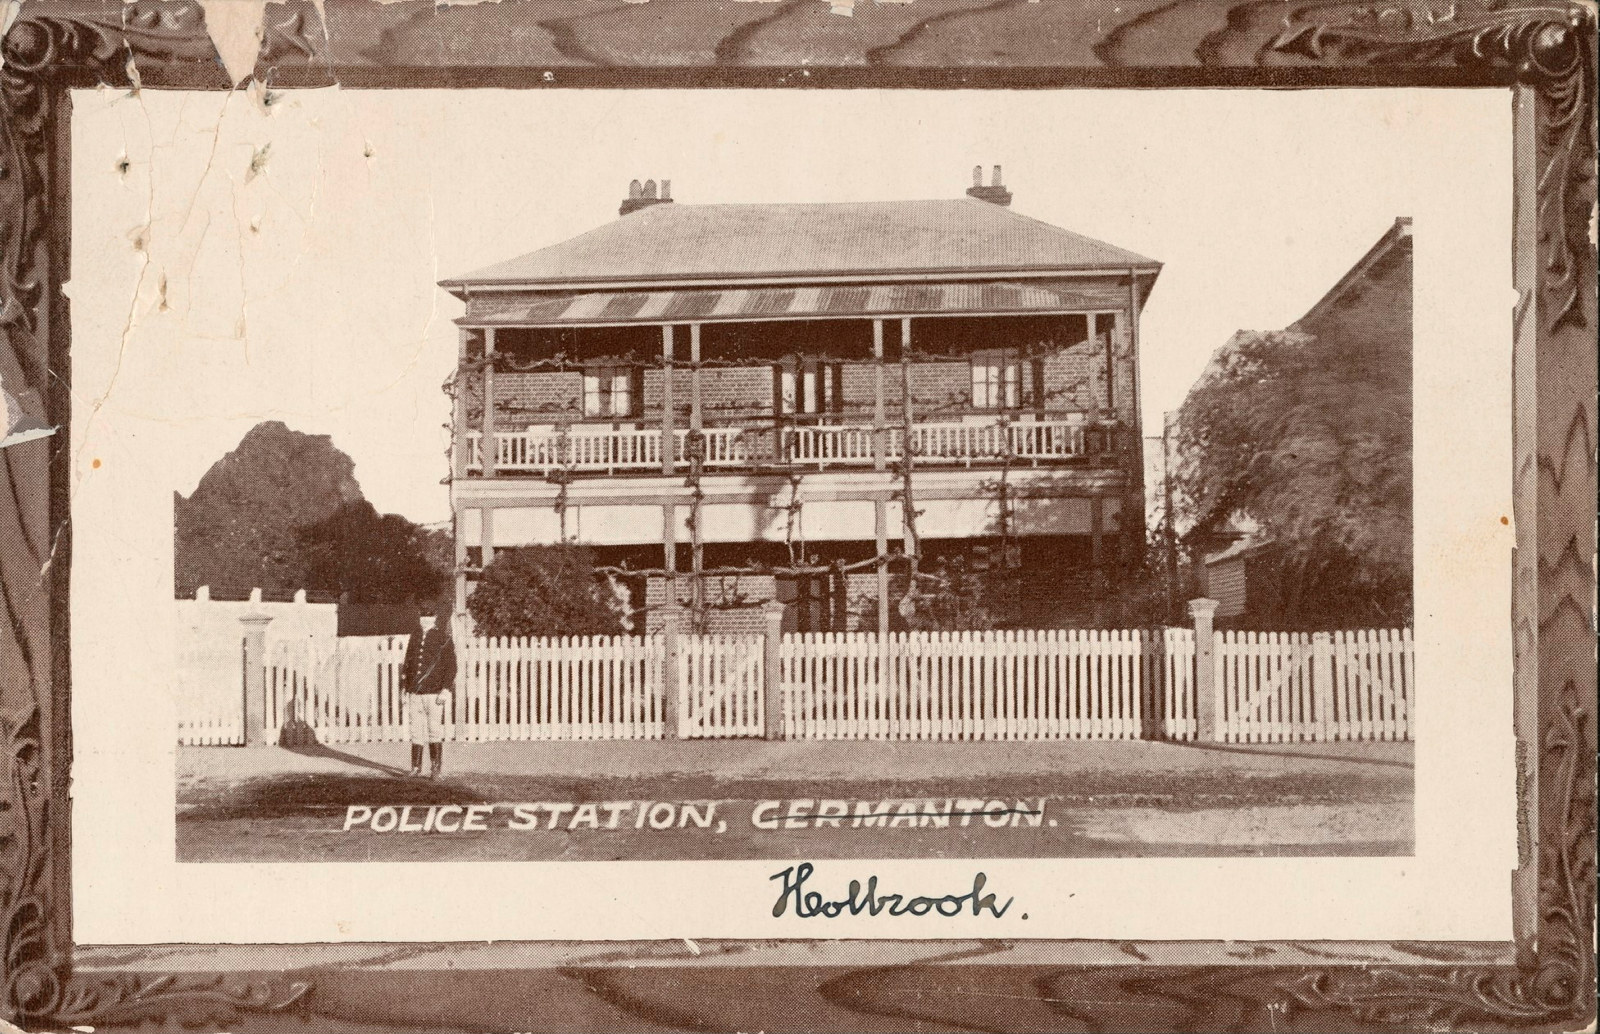 Black and white postcard depicting police station with hand written note saying Holbrook, with Germanton crossed out.